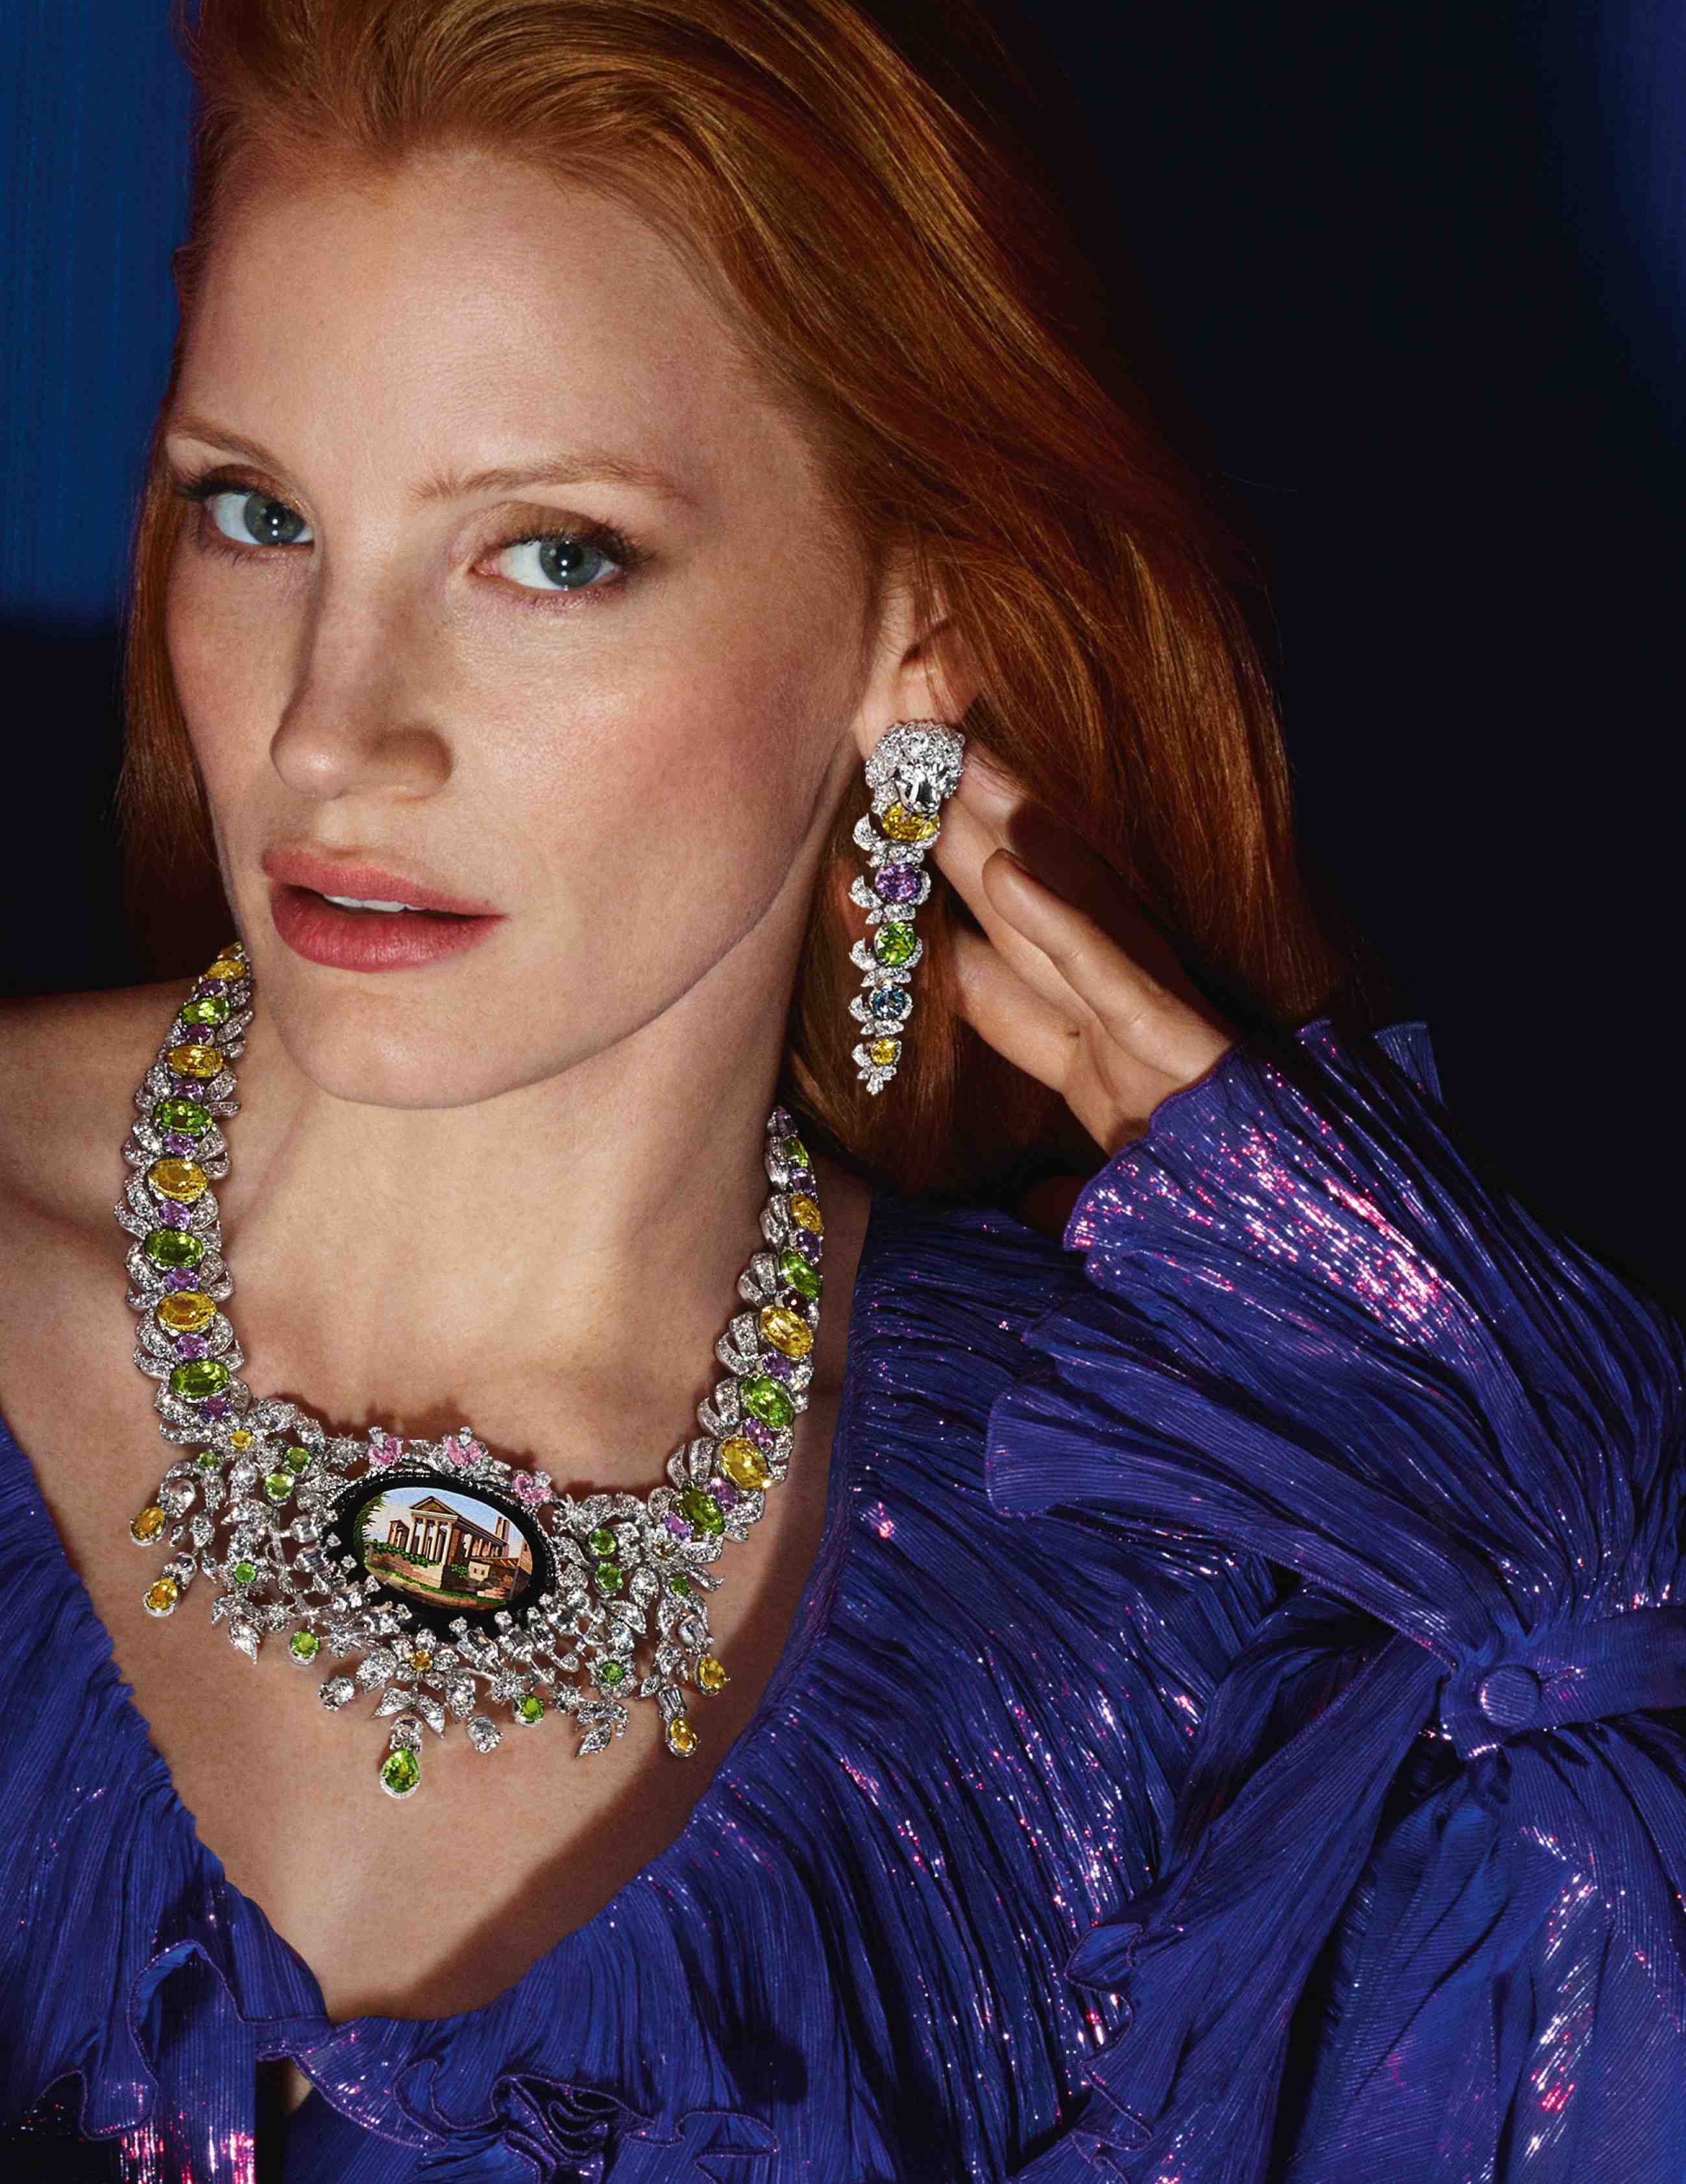 Gucci Presents High Jewellery 2022: Hortus Deliciarum starring